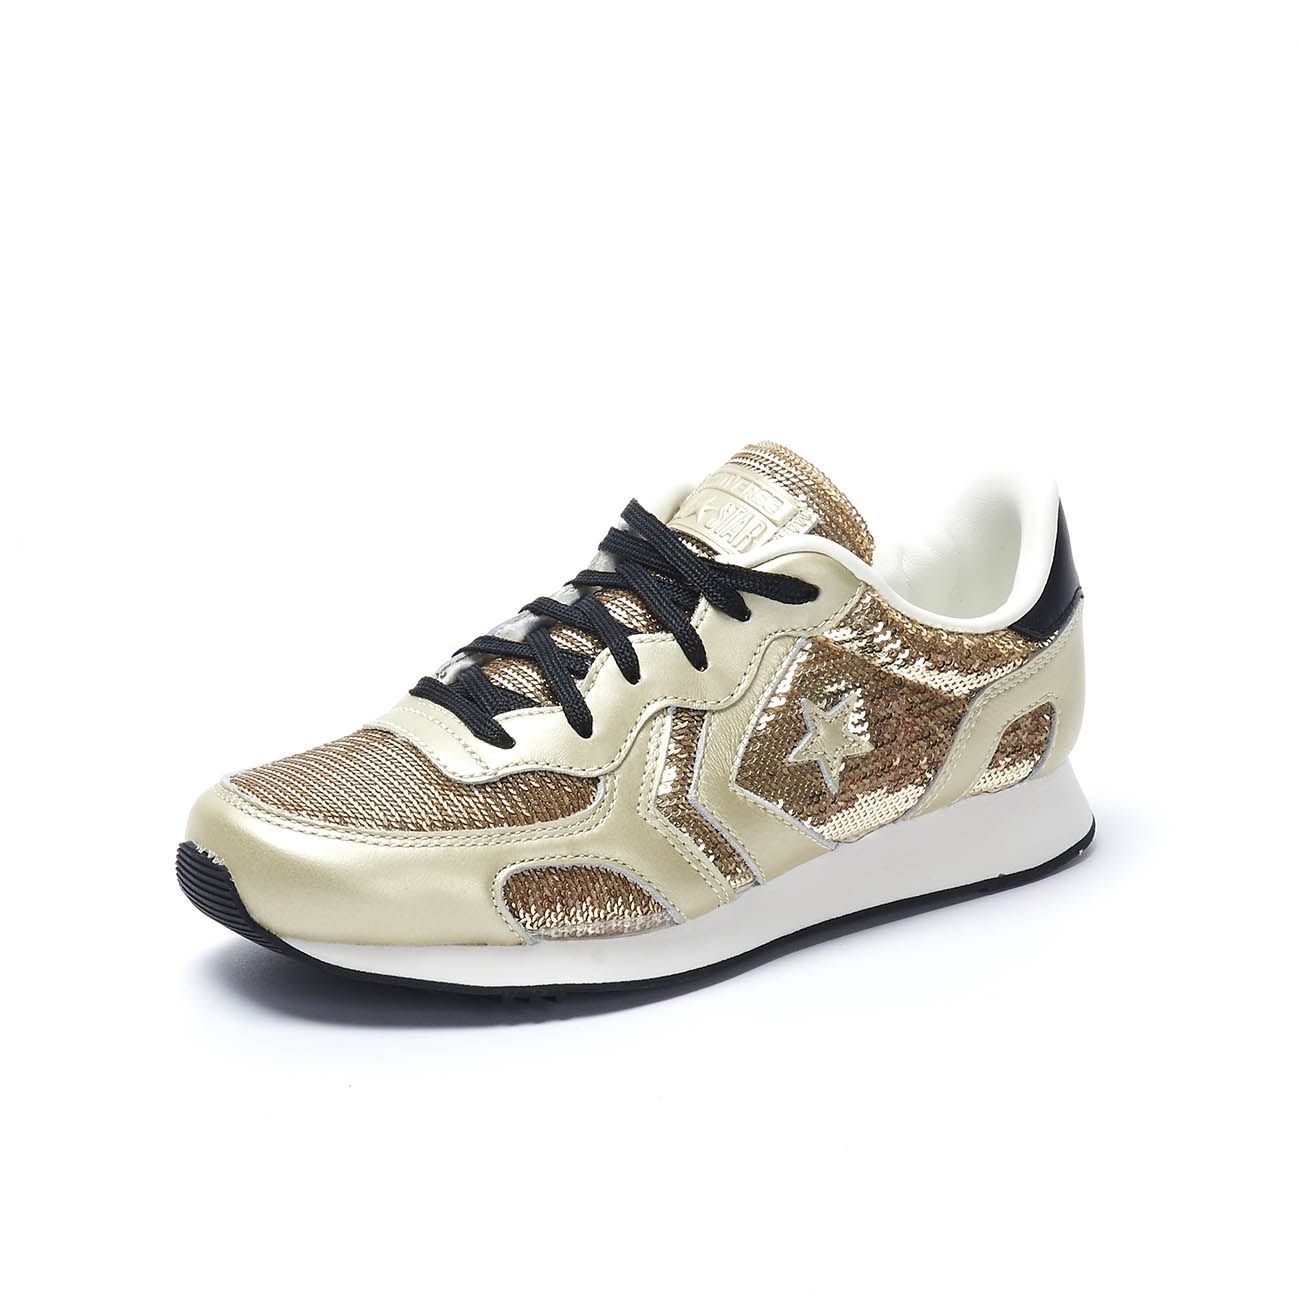 CONVERSE AUCKLAND RACER OX SEQUINS SNEAKERS Woman Light gold White ... بق شو